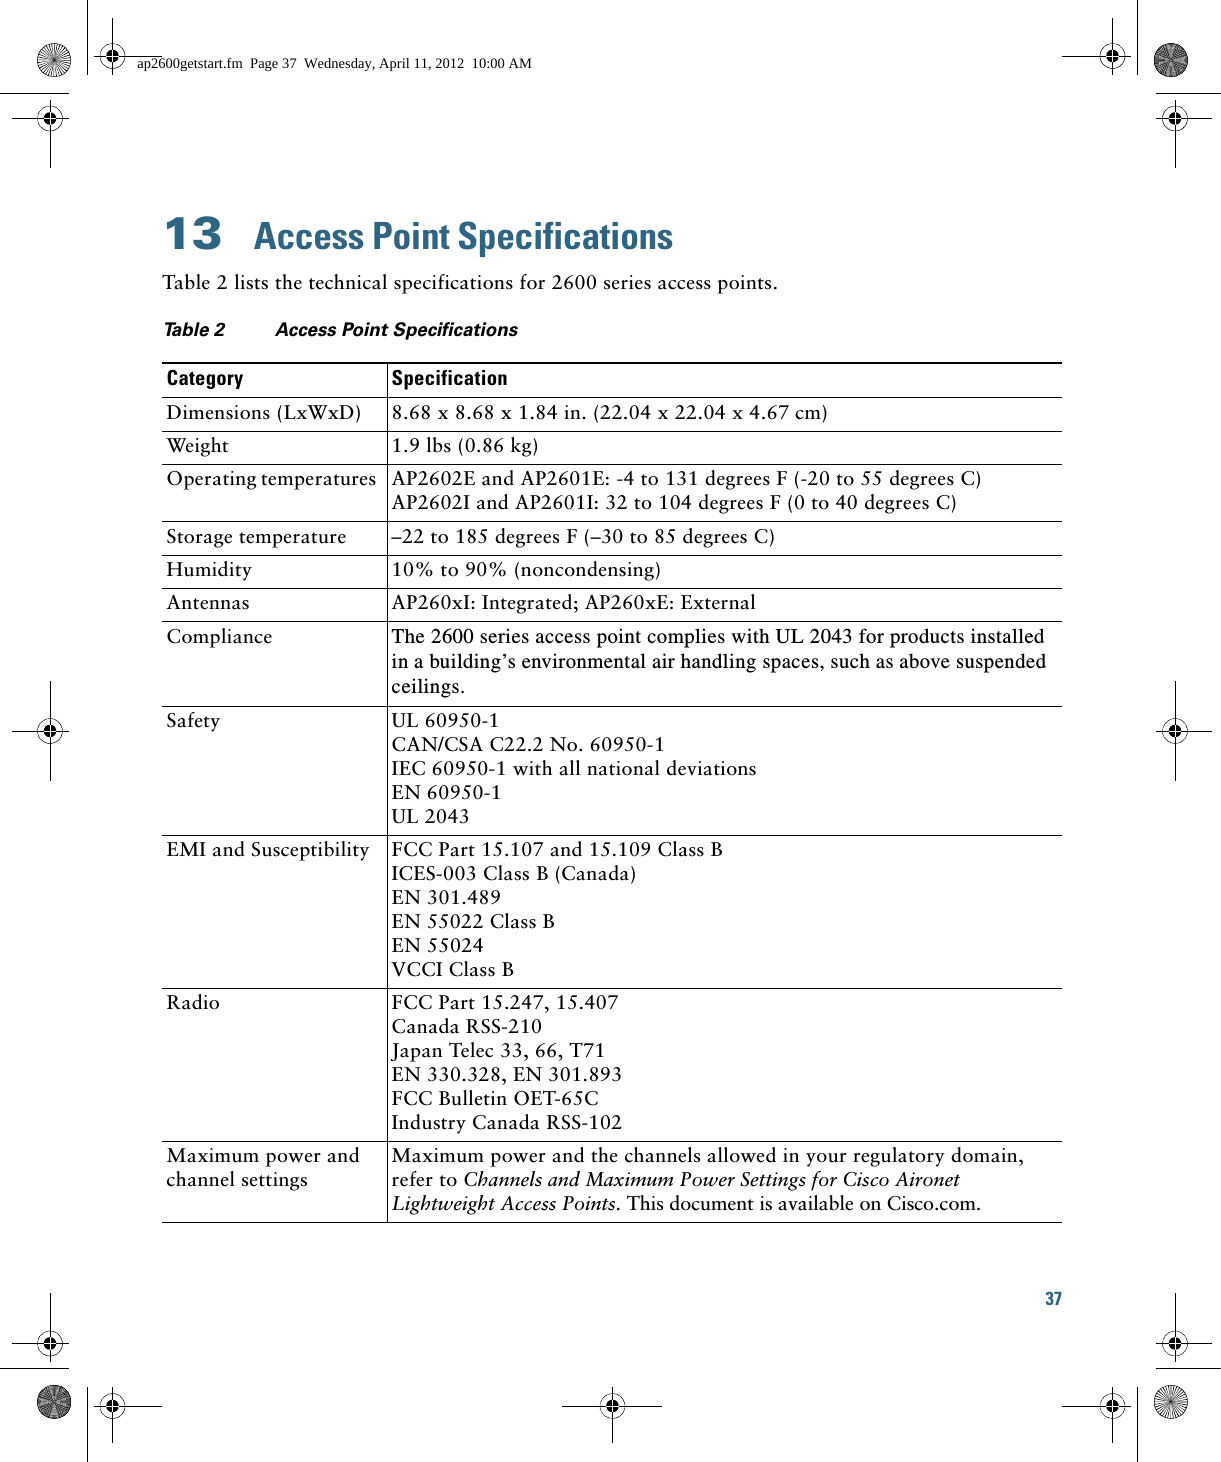 37 13  Access Point SpecificationsTable 2 lists the technical specifications for 2600 series access points.Ta b l e  2 Access Point Specifications  Category SpecificationDimensions (LxWxD) 8.68 x 8.68 x 1.84 in. (22.04 x 22.04 x 4.67 cm) Weight 1.9 lbs (0.86 kg)Operating temperatures AP2602E and AP2601E: -4 to 131 degrees F (-20 to 55 degrees C)AP2602I and AP2601I: 32 to 104 degrees F (0 to 40 degrees C)Storage temperature –22 to 185 degrees F (–30 to 85 degrees C)Humidity 10% to 90% (noncondensing)Antennas AP260xI: Integrated; AP260xE: ExternalCompliance The 2600 series access point complies with UL 2043 for products installed in a building’s environmental air handling spaces, such as above suspended ceilings.Safety UL 60950-1CAN/CSA C22.2 No. 60950-1IEC 60950-1 with all national deviationsEN 60950-1UL 2043EMI and Susceptibility FCC Part 15.107 and 15.109 Class BICES-003 Class B (Canada)EN 301.489EN 55022 Class B EN 55024VCCI Class BRadio FCC Part 15.247, 15.407Canada RSS-210Japan Telec 33, 66, T71EN 330.328, EN 301.893FCC Bulletin OET-65CIndustry Canada RSS-102Maximum power and channel settingsMaximum power and the channels allowed in your regulatory domain, refer to Channels and Maximum Power Settings for Cisco Aironet Lightweight Access Points. This document is available on Cisco.com.ap2600getstart.fm  Page 37  Wednesday, April 11, 2012  10:00 AM